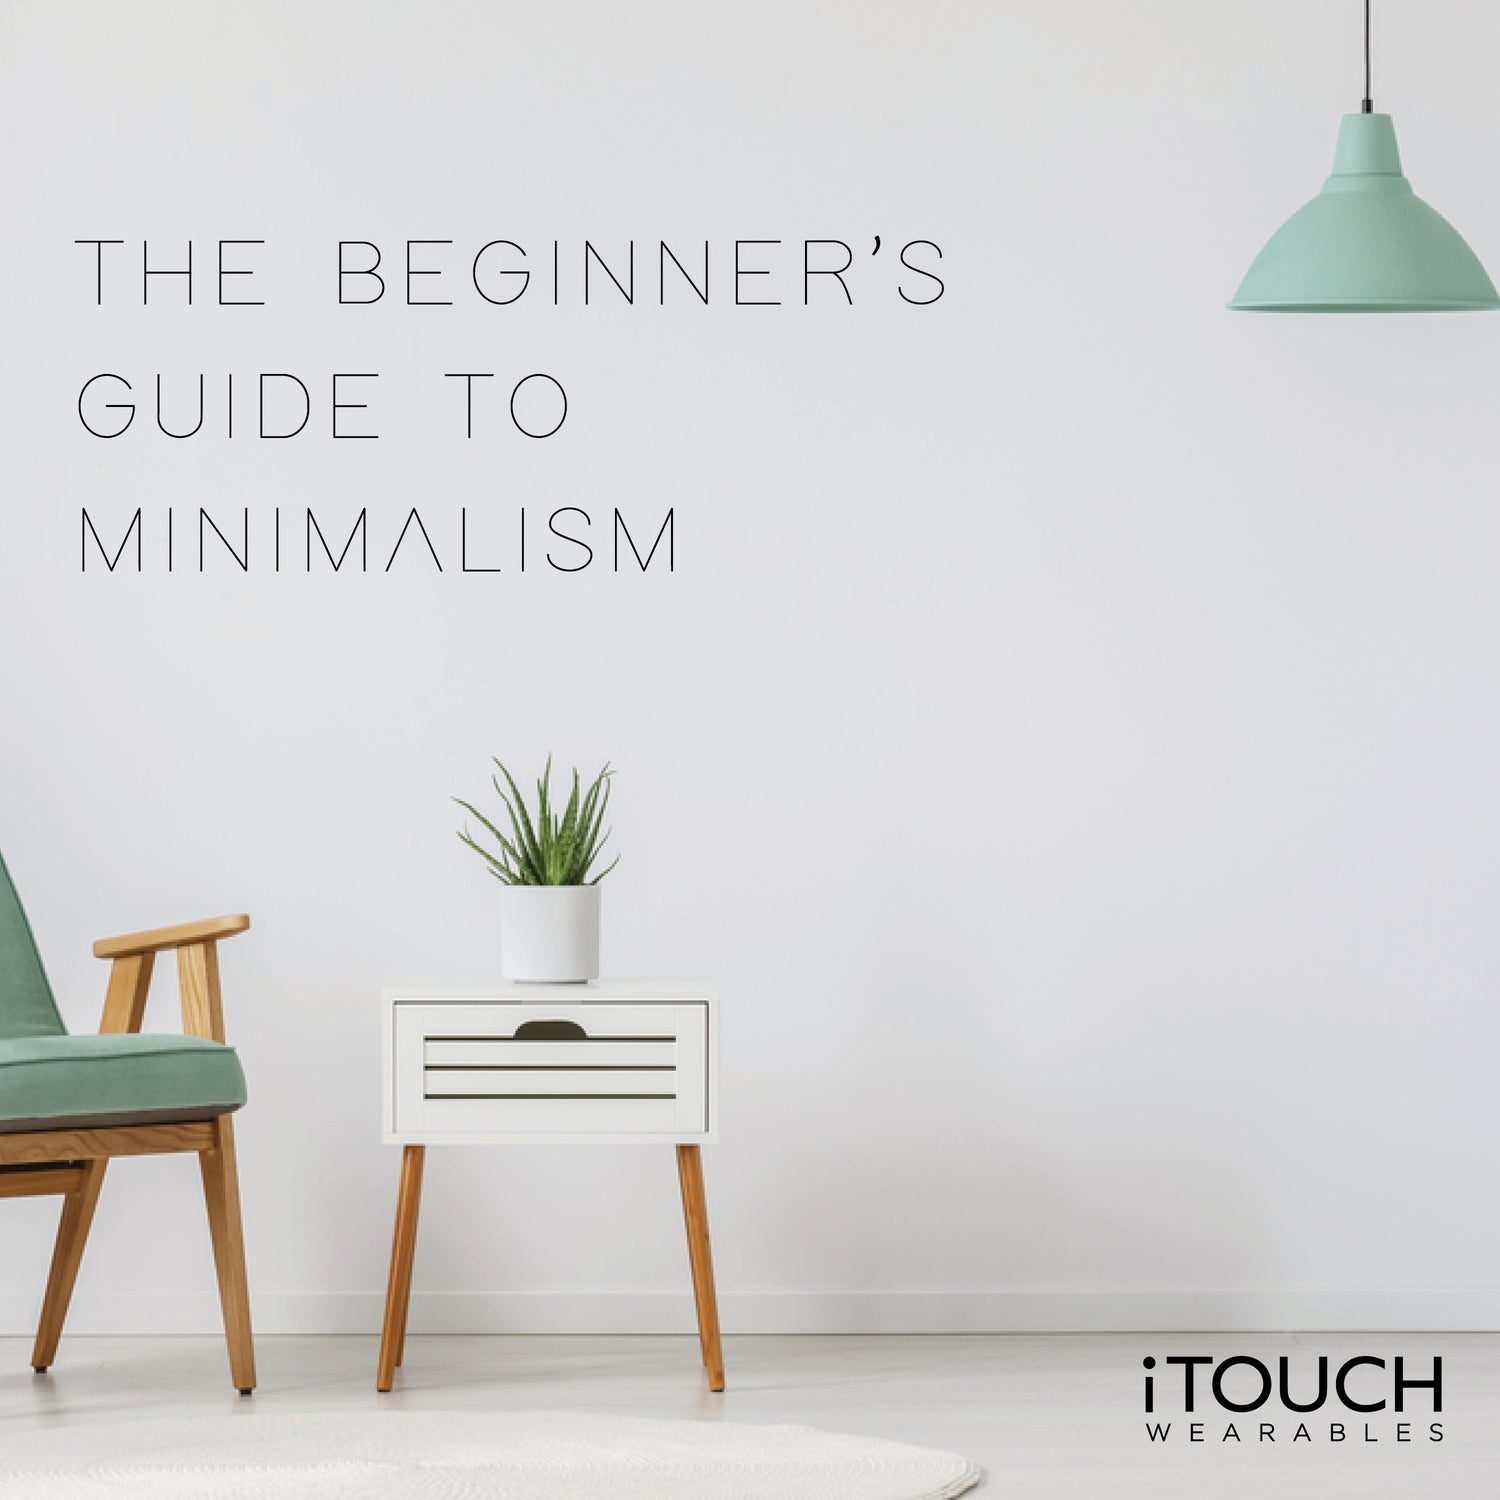 The Beginner's Guide to Minimalism